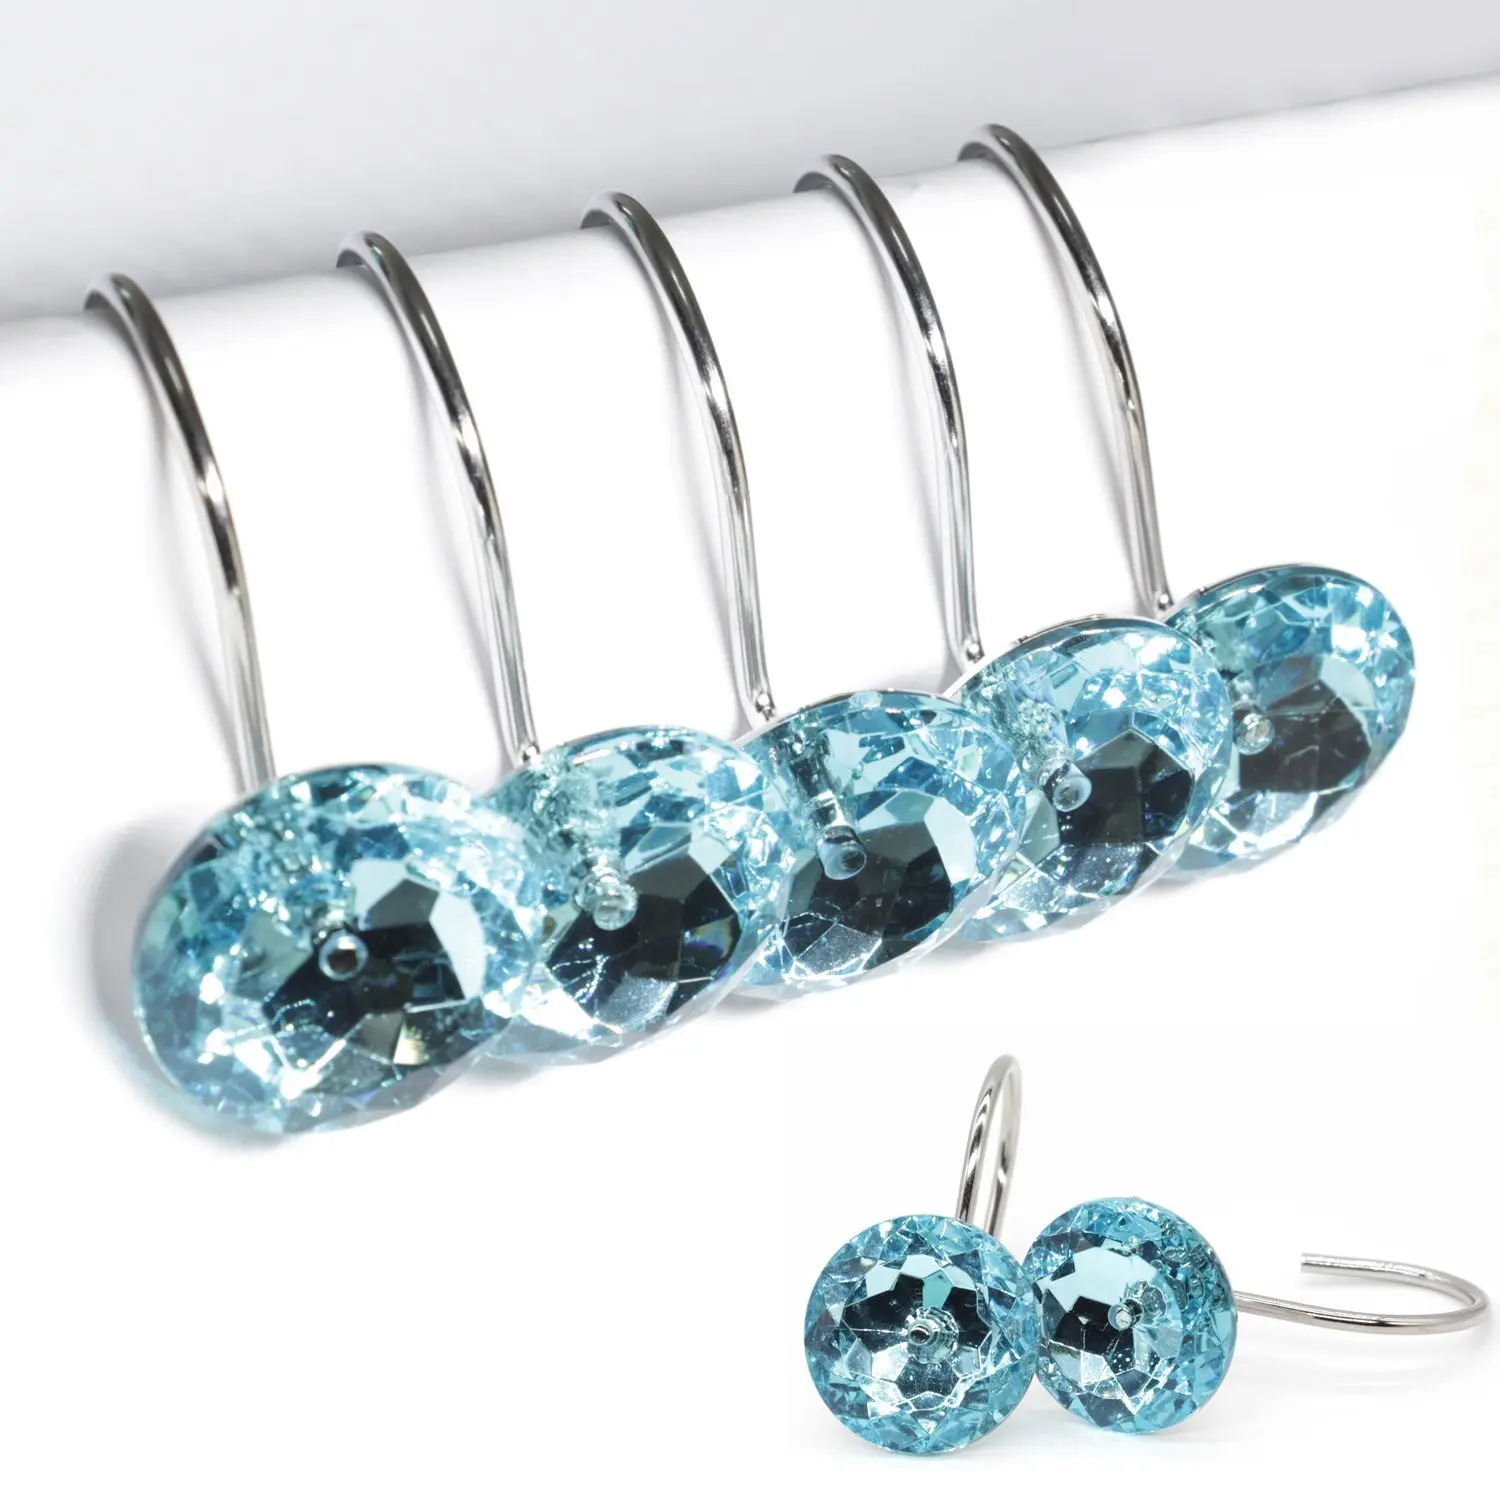 

12 PCS Lovely Clear Acrylic Blue Crystal Shower Curtain Hooks Shower Rings